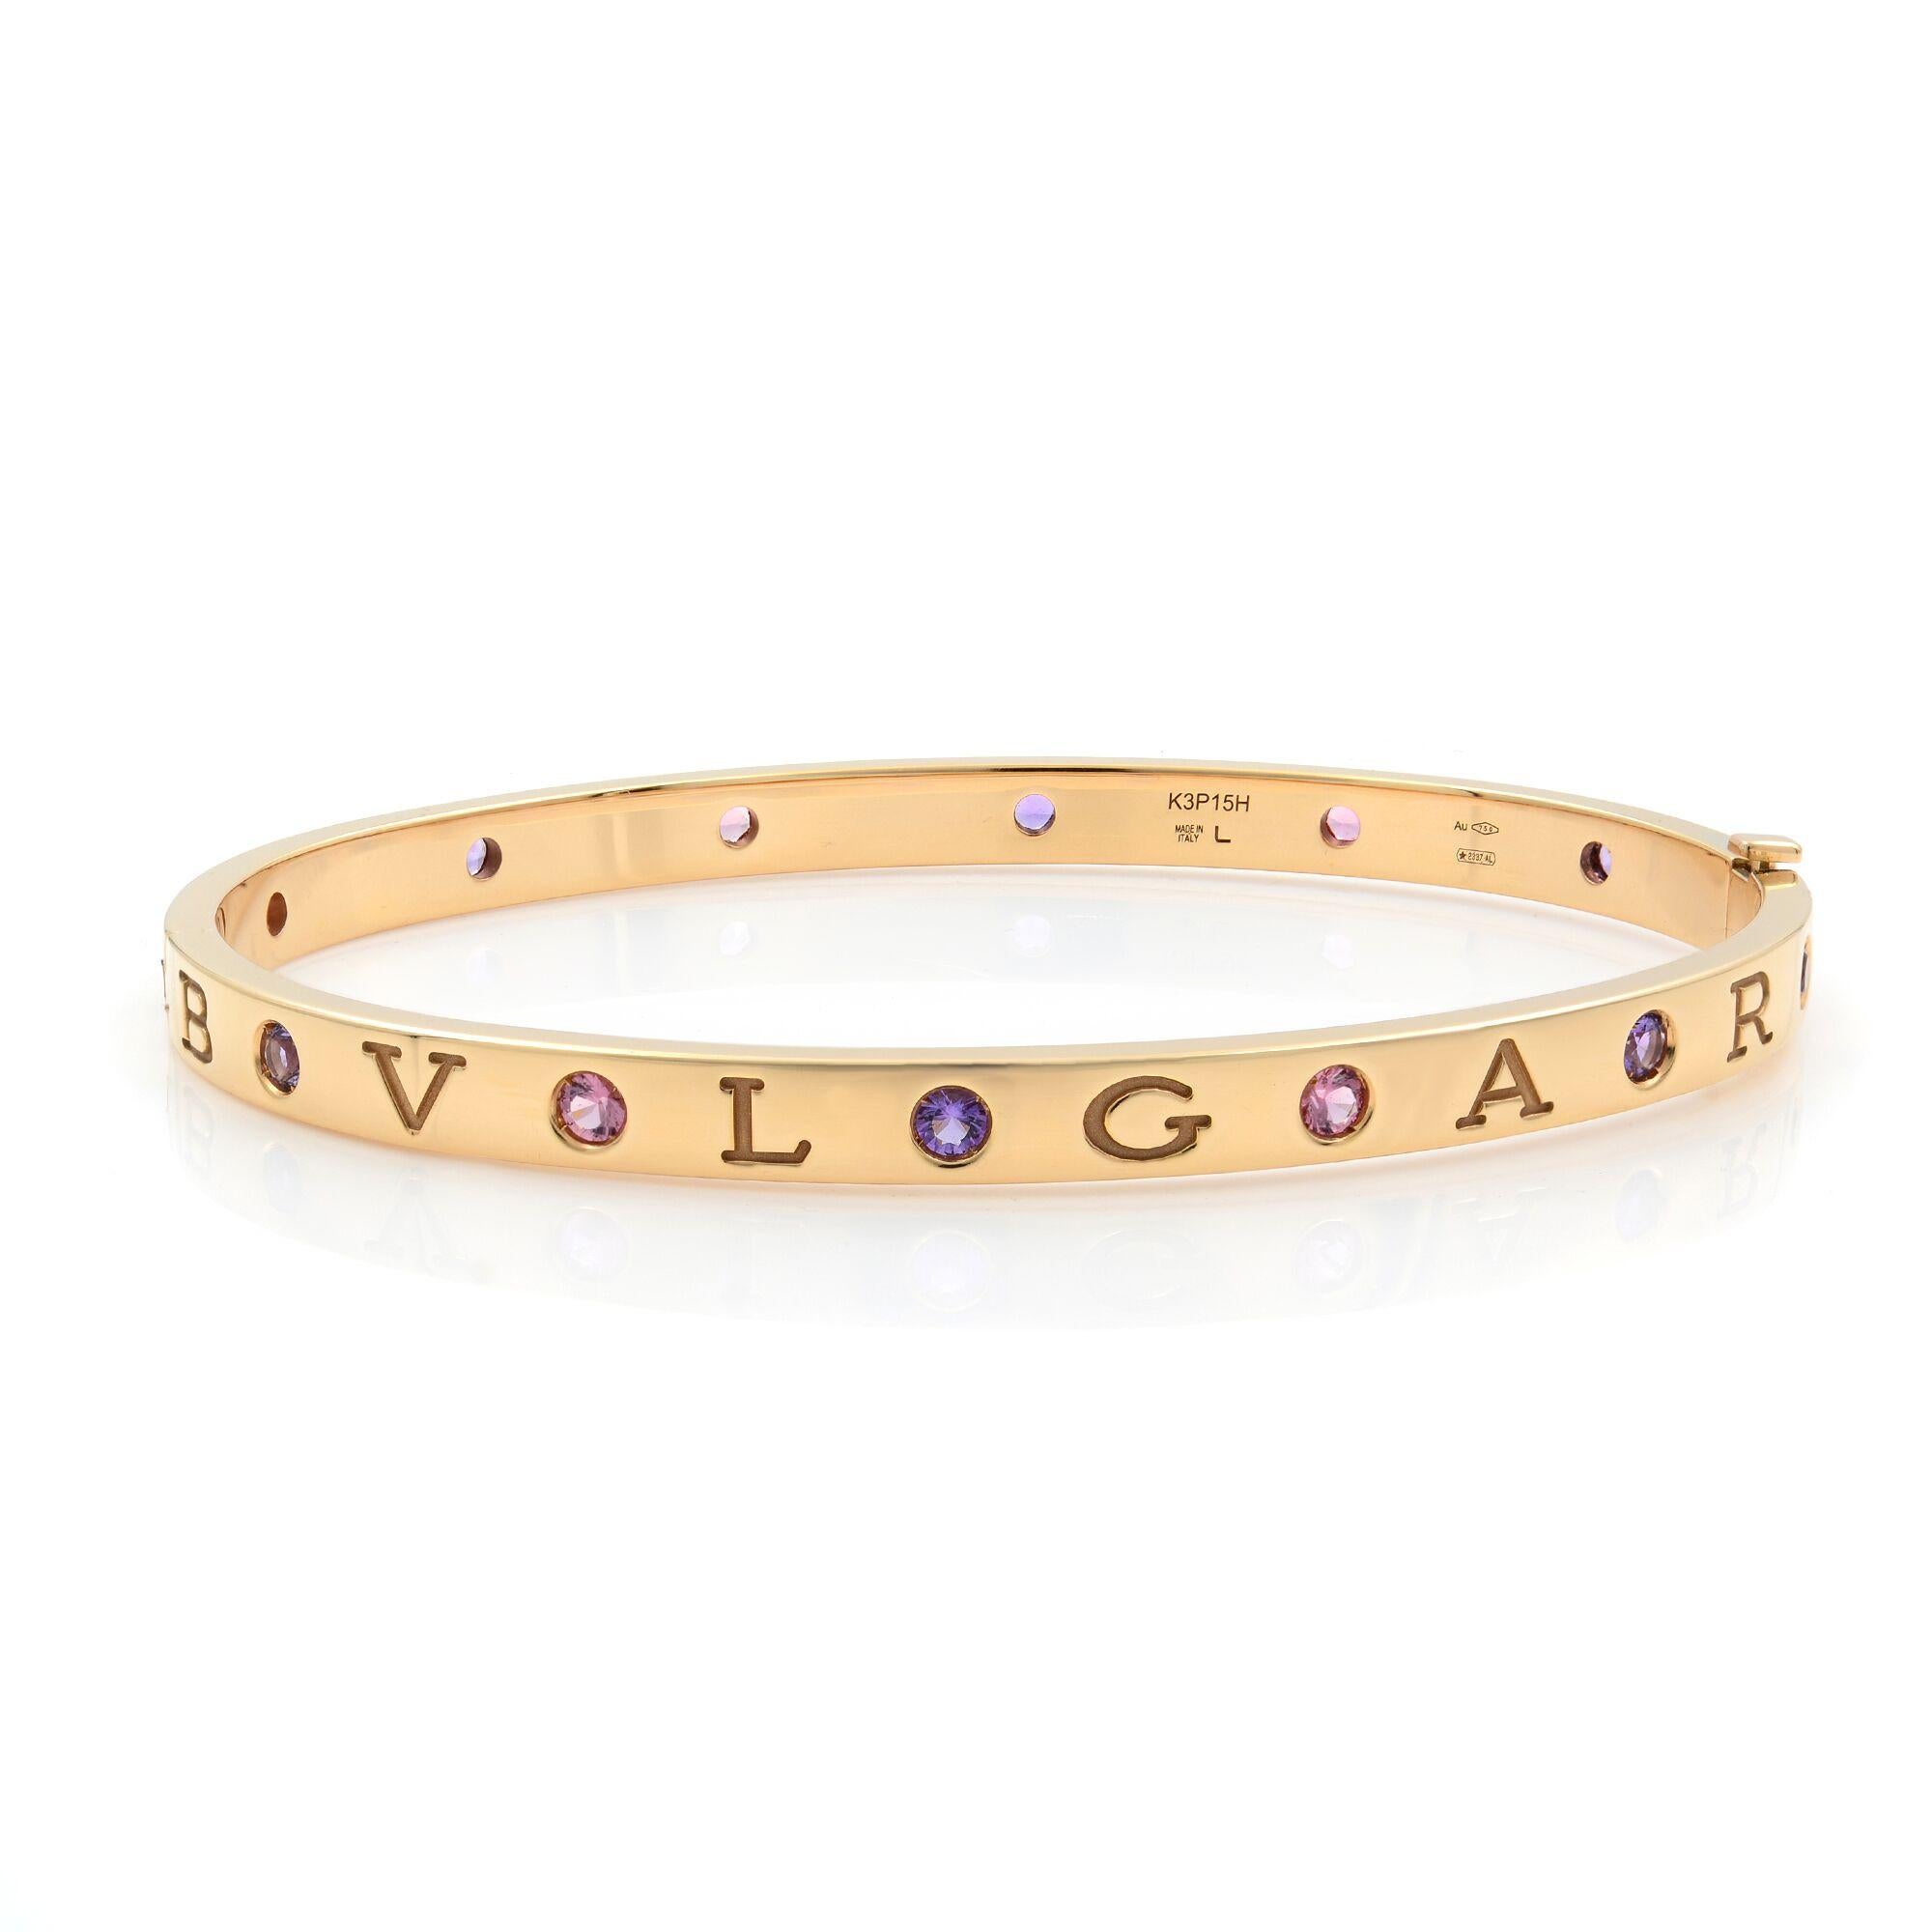 A classic Bvlgari Bvlgari18 kt rose gold bangle bracelet. This bangle is set with six amethysts and six pink tourmalines.This piece is incorporating jubilant gemstones that recall the fruitiness of fine sorbet, the BVLGARI BVLGARI ROMAN SORBETS